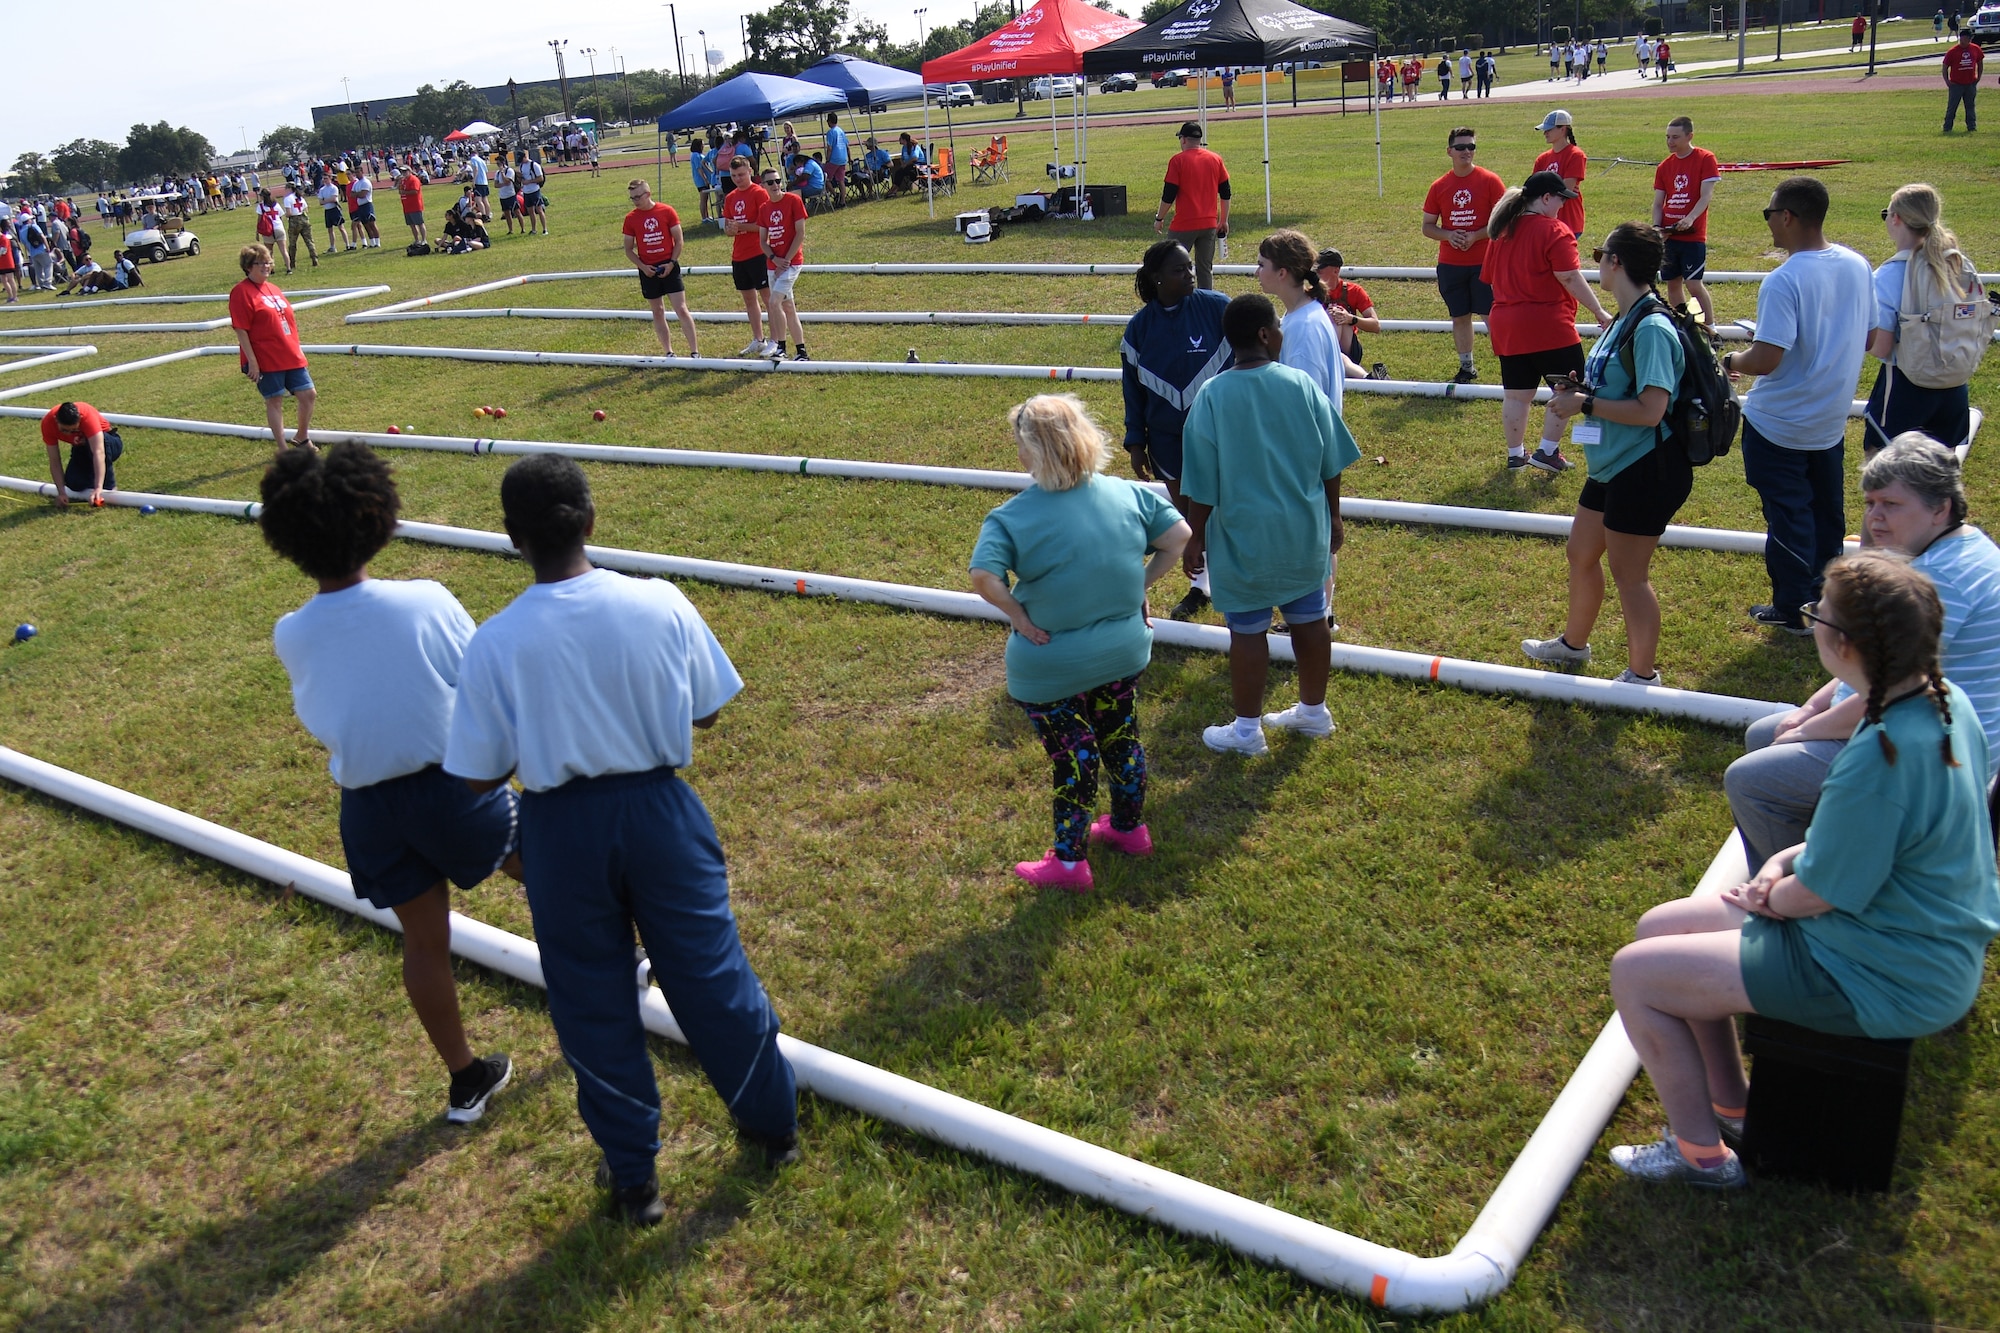 Athletes and volunteers attend the Special Olympics Mississippi Summer Games at Keesler Air Force Base, Miss., May 14, 2022. Over 600 athletes participated in the Summer Games. (U.S. Air Force photo by Kemberly Groue)